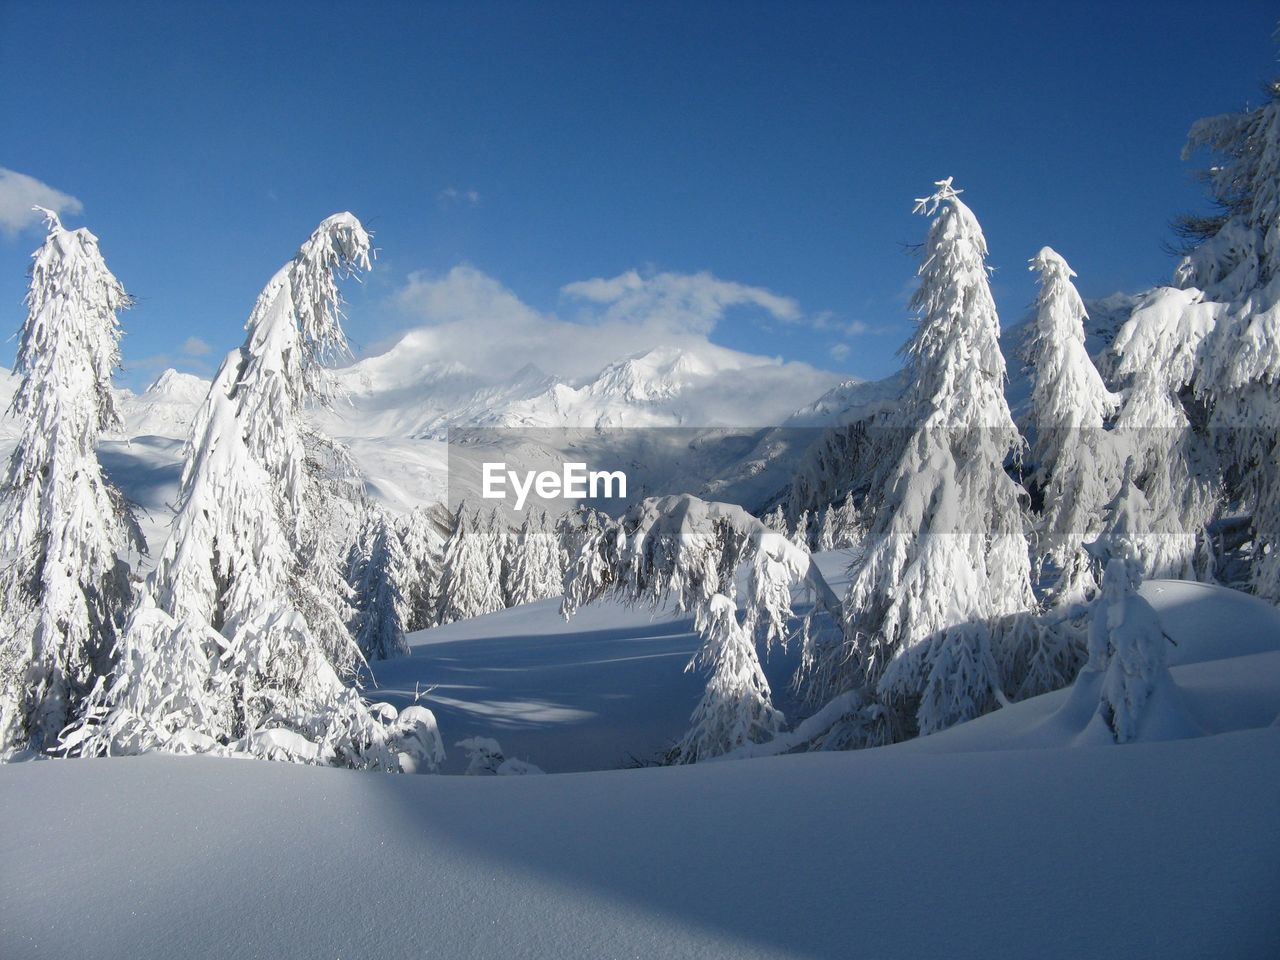 Enchanted landscape after heavy snowfall